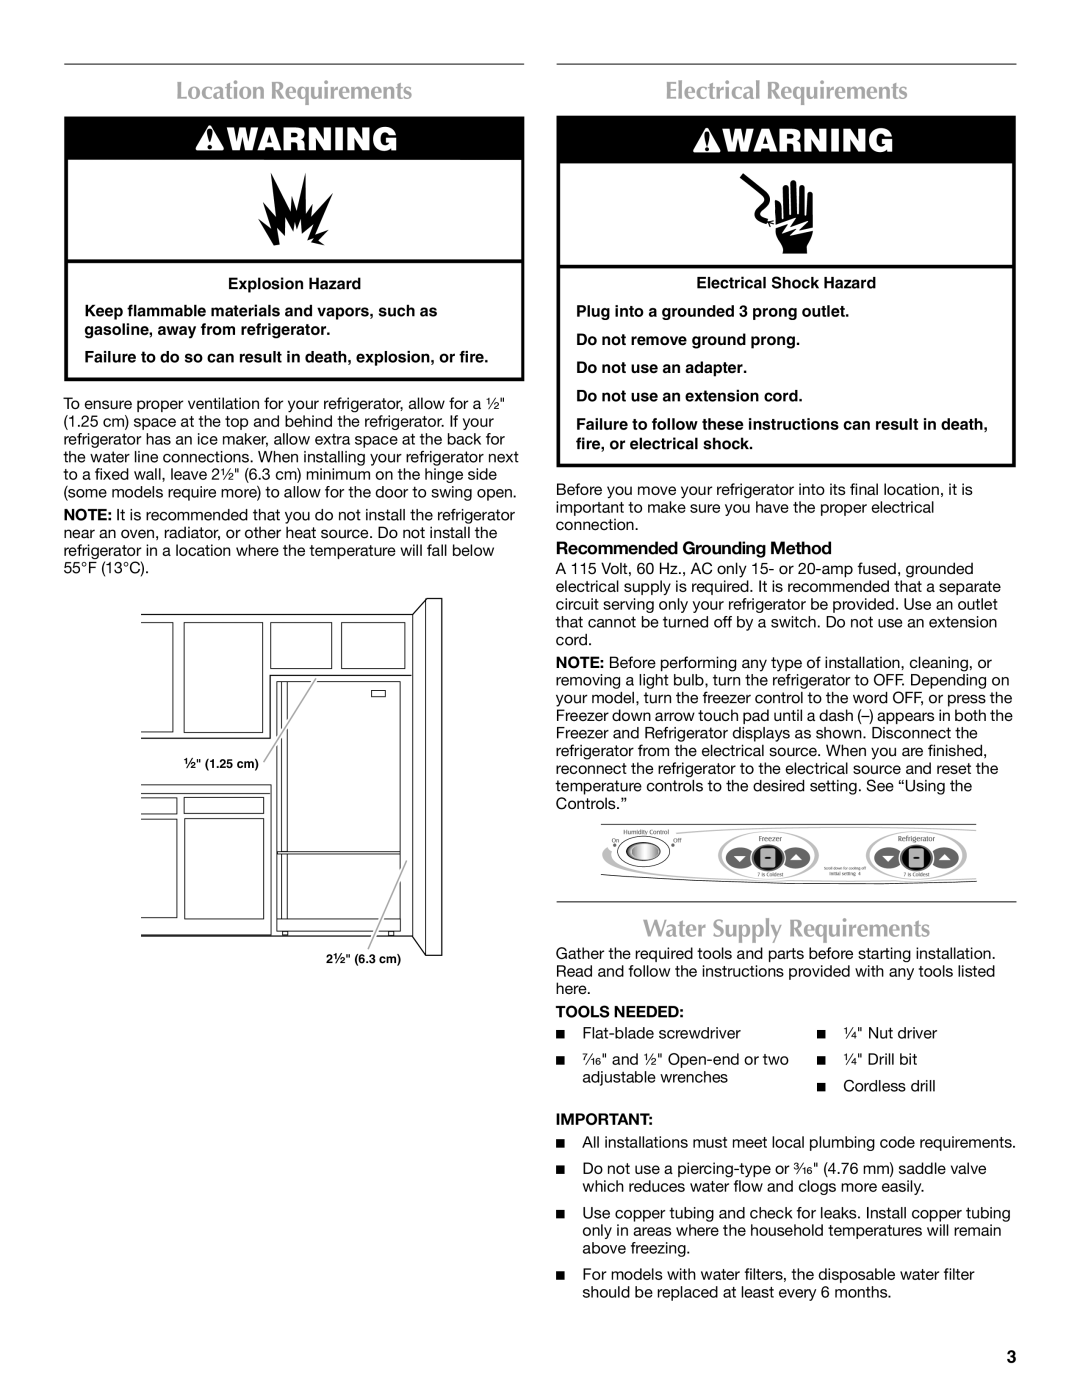 Maytag W10208790A Location Requirements, Electrical Requirements, Water Supply Requirements, Recommended Grounding Method 